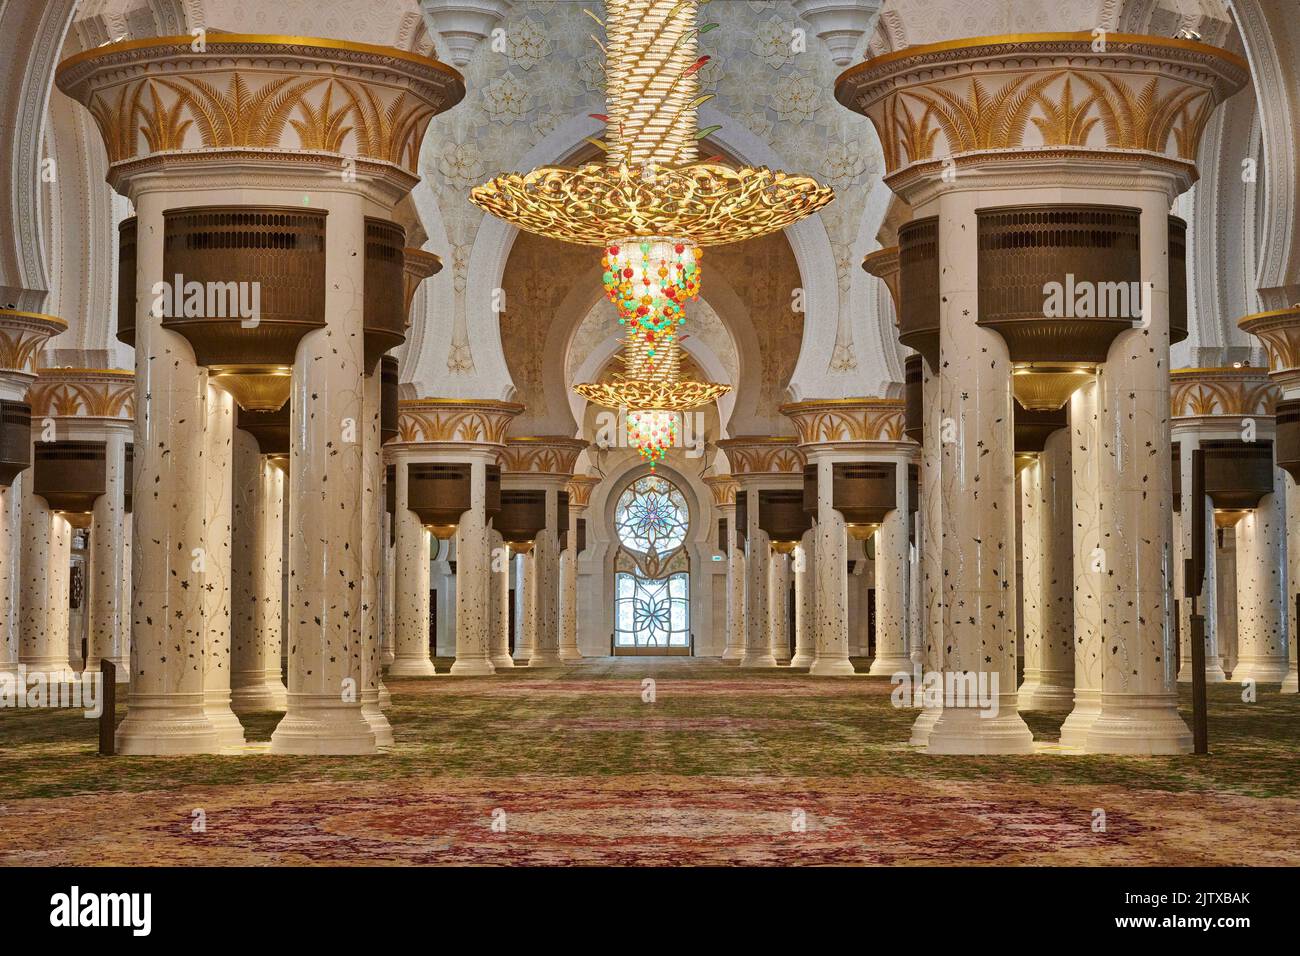 The main prayer room at Sheikh Zayed Mosque. Stock Photo